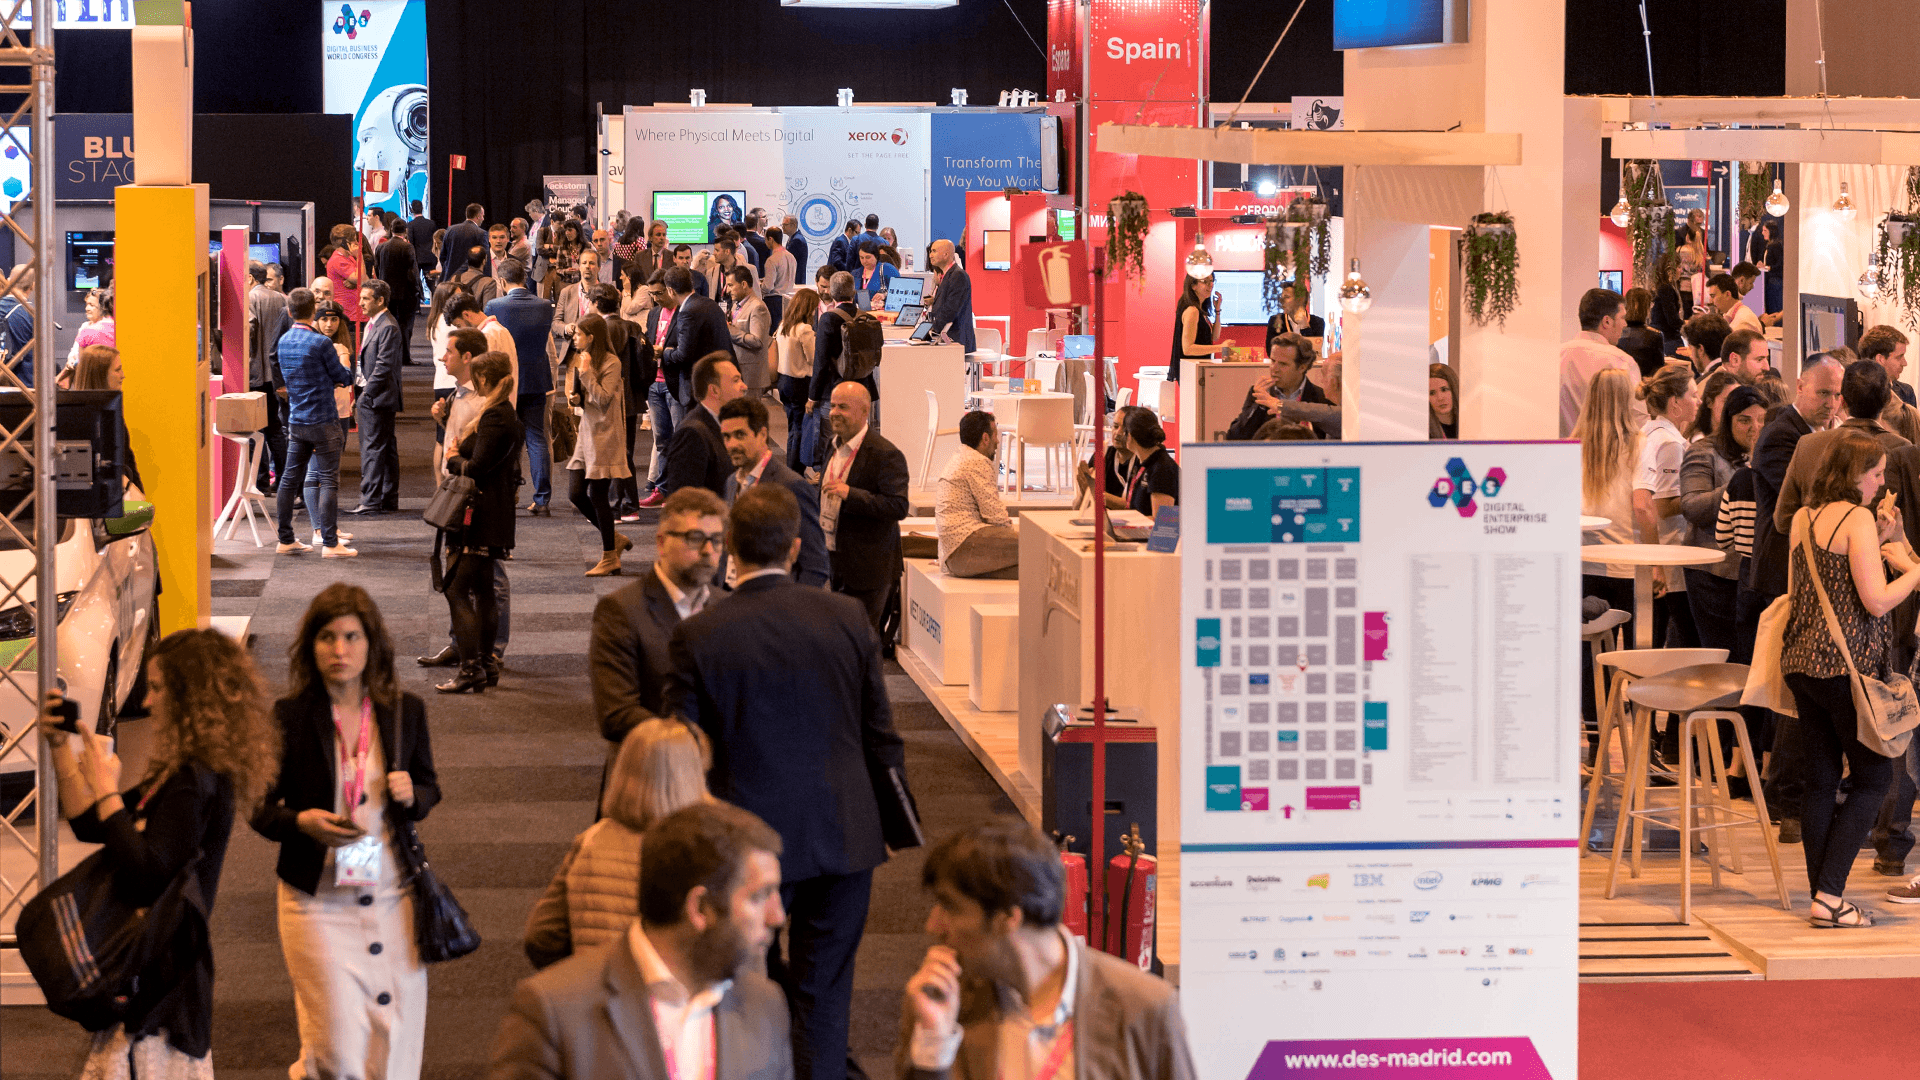 20,974 attendees from 51 countries visited DES2018 and consolidates the event as the 'Davos' forum for Digital Economy